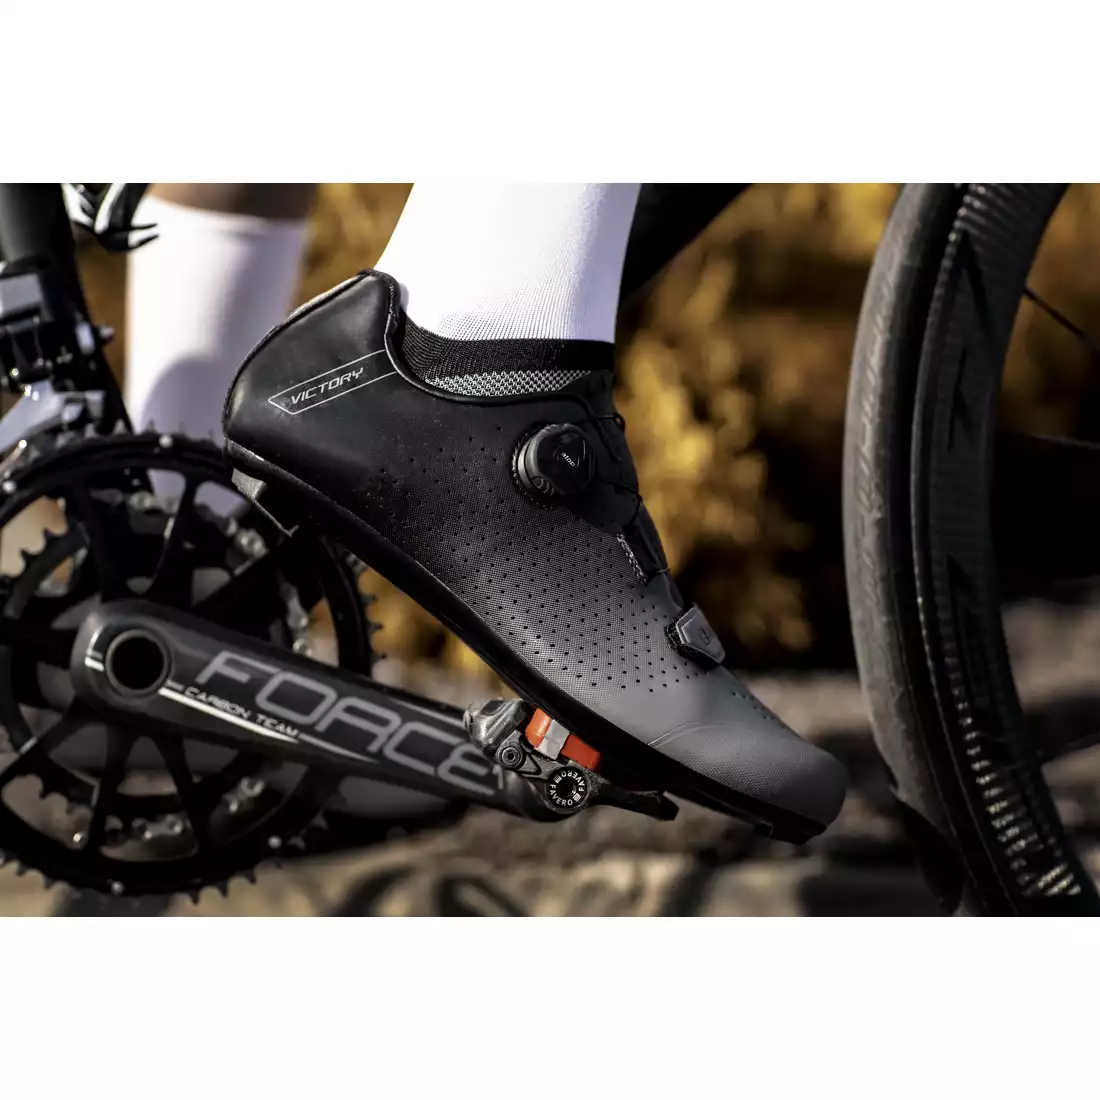 FORCE ROAD VICTORY Road cycling shoes, gray and black